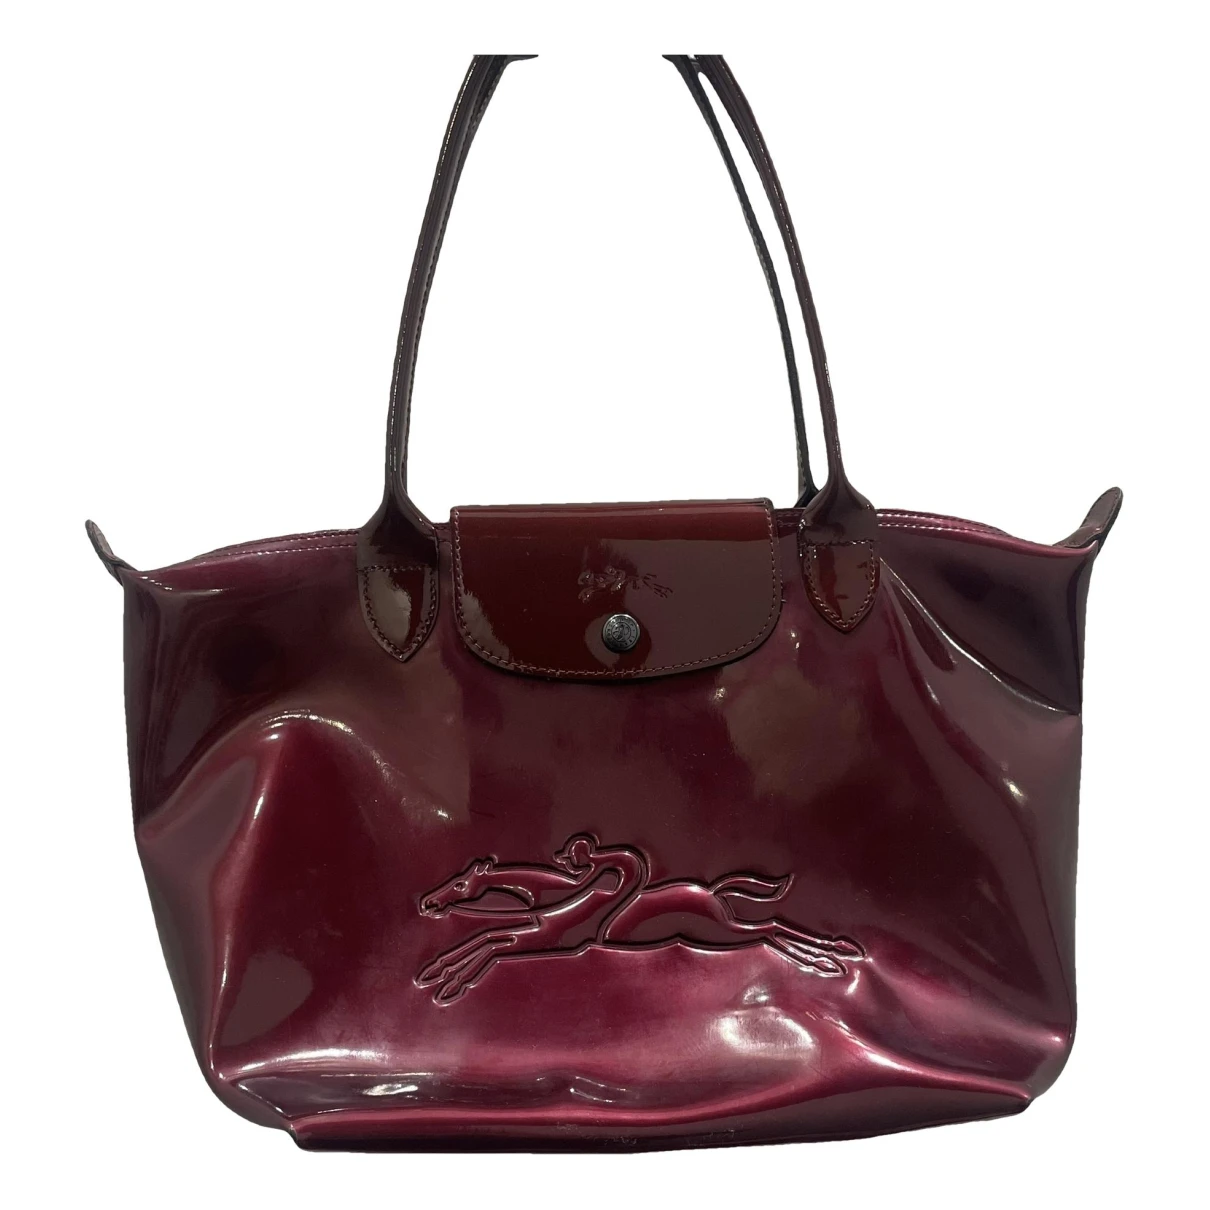 Pre-owned Longchamp Pliage Patent Leather Handbag In Burgundy